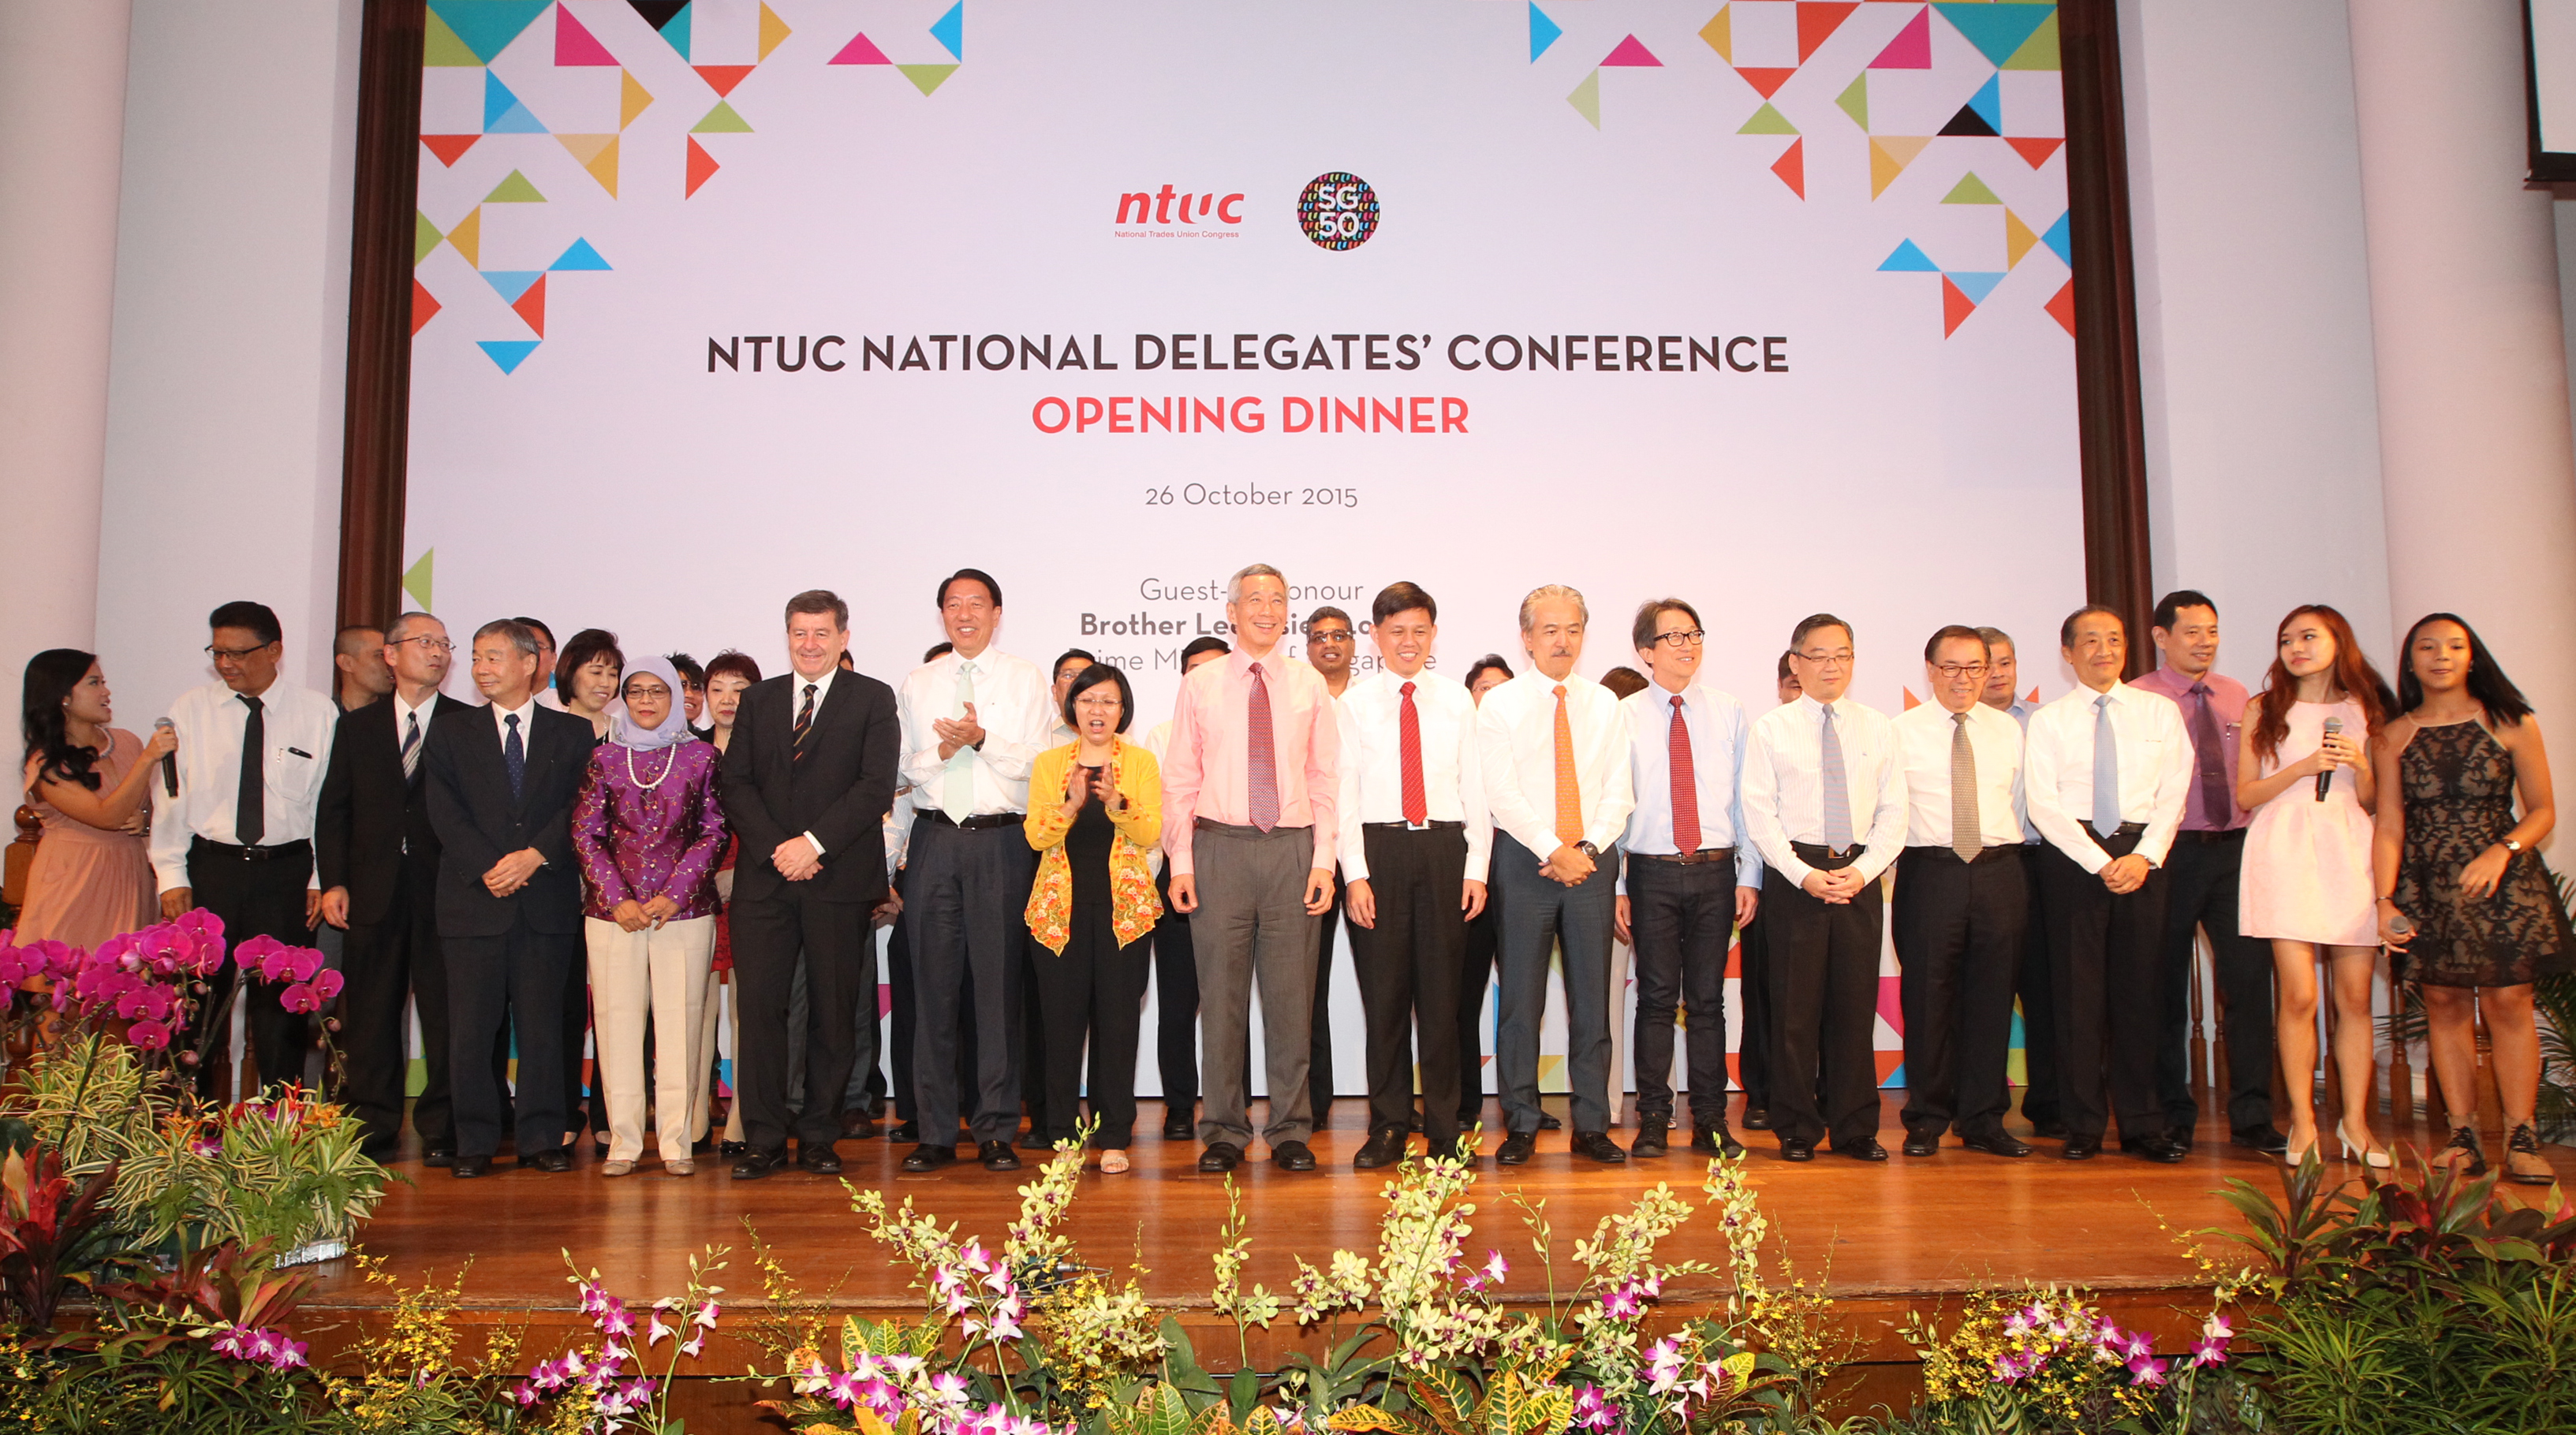 Prime Minister Lee Hsien Loong at the National Delegates Conference Opening Dinner on 26 Oct 2015 (MCI Photo by Chwee)